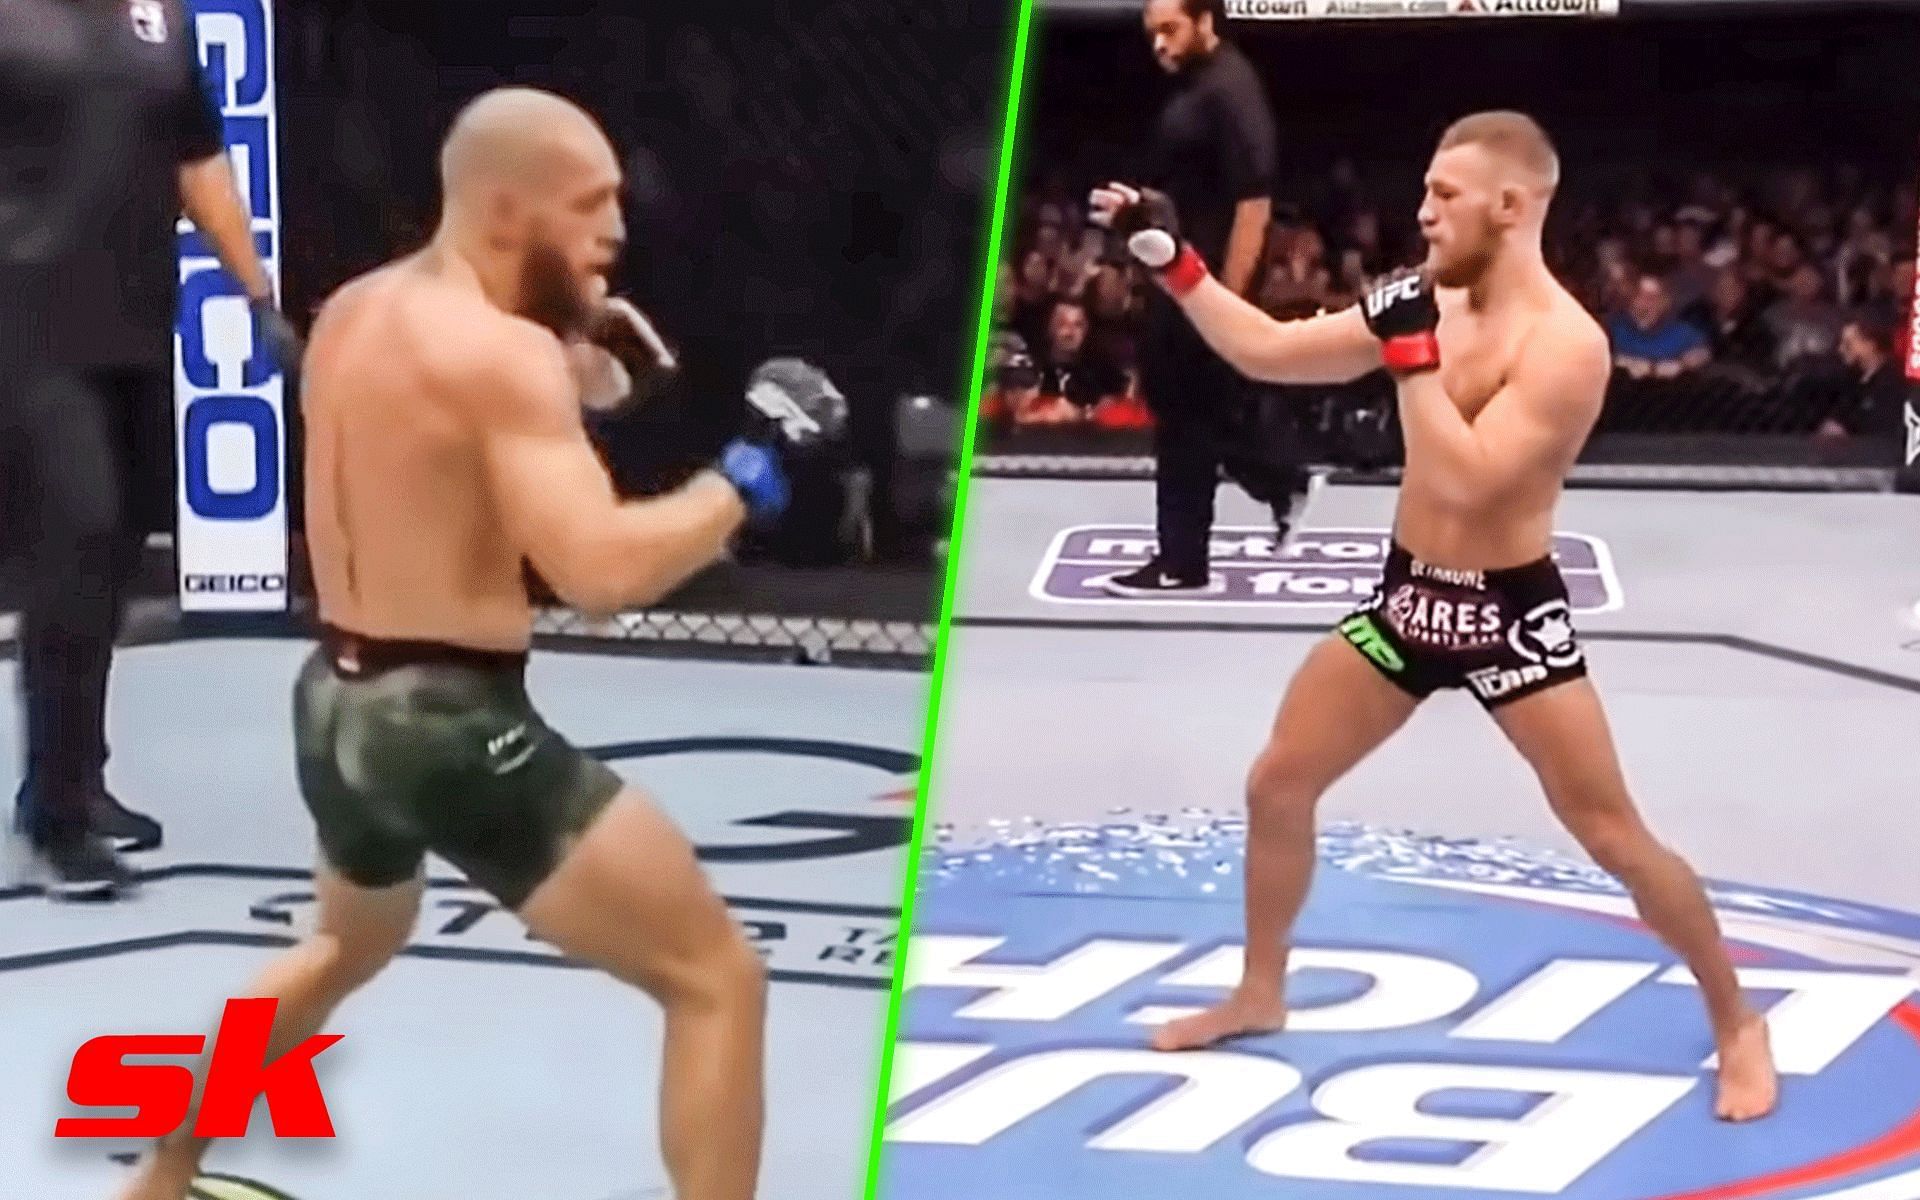 Conor McGregor in boxing and karate stances [Image courtesy: JAYFADMMA on YouTube]